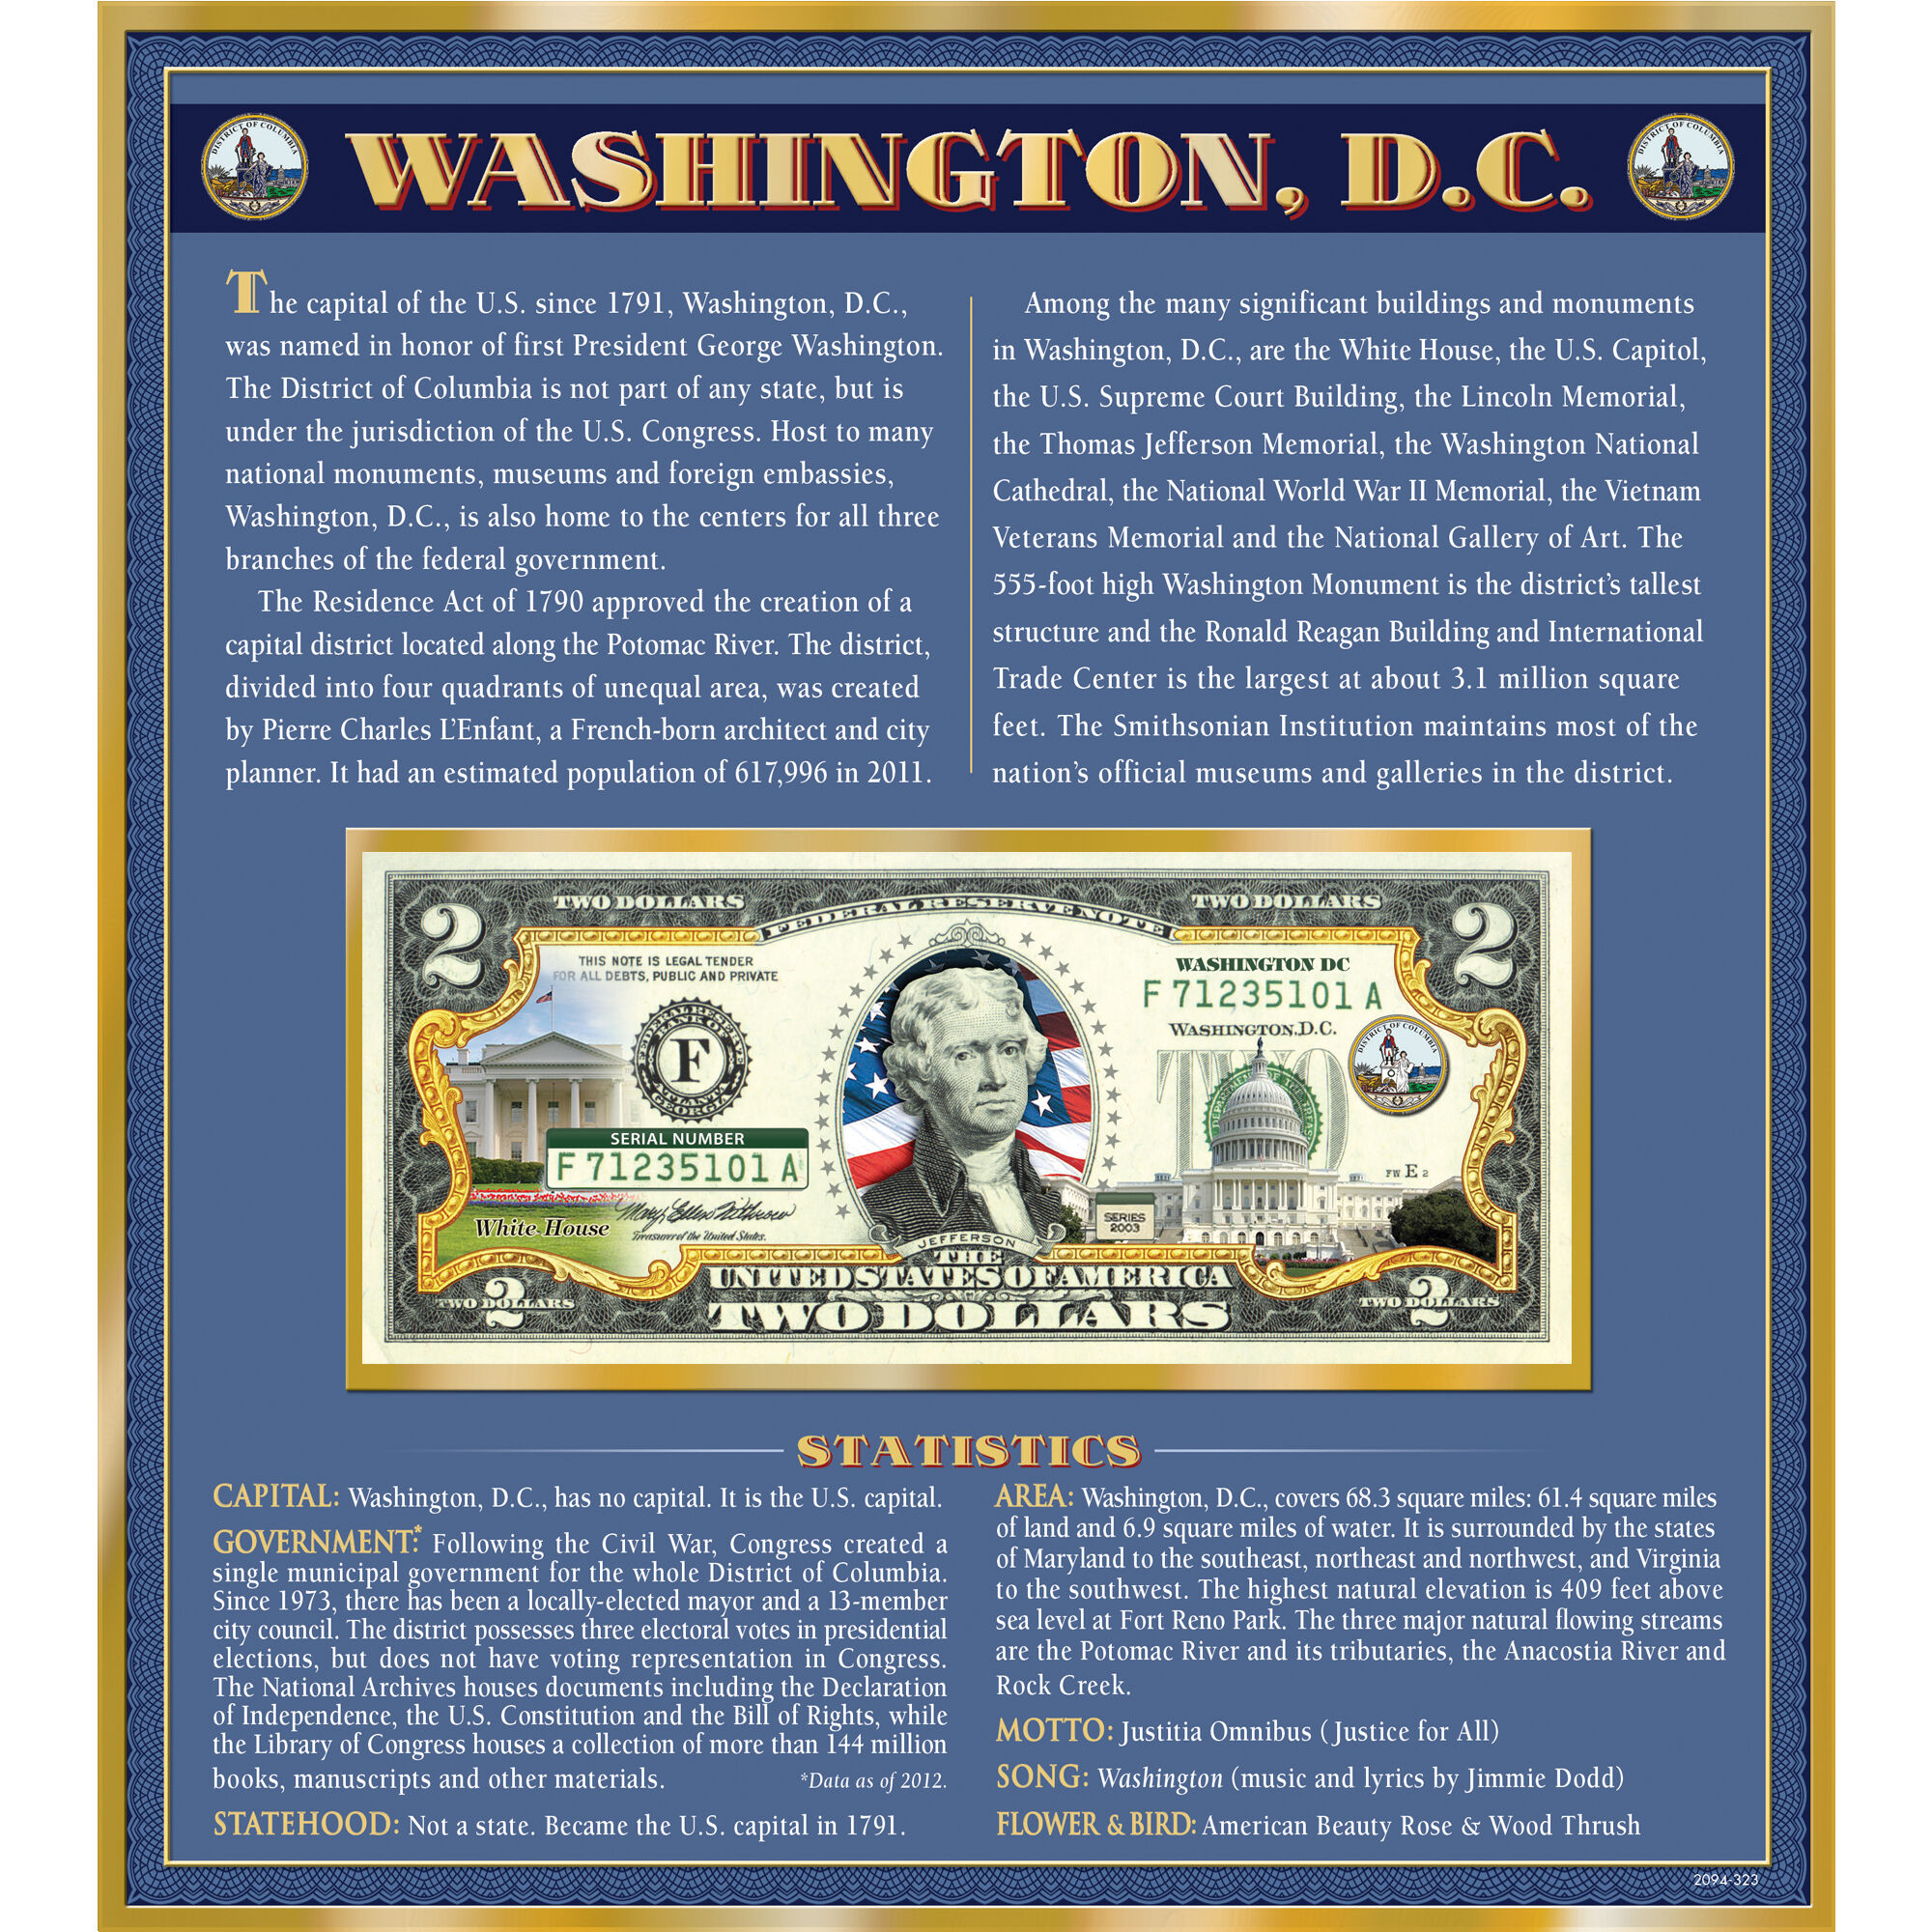 The United States Enhanced Two Dollar Bill Collection 6448 0031 a Washington DC